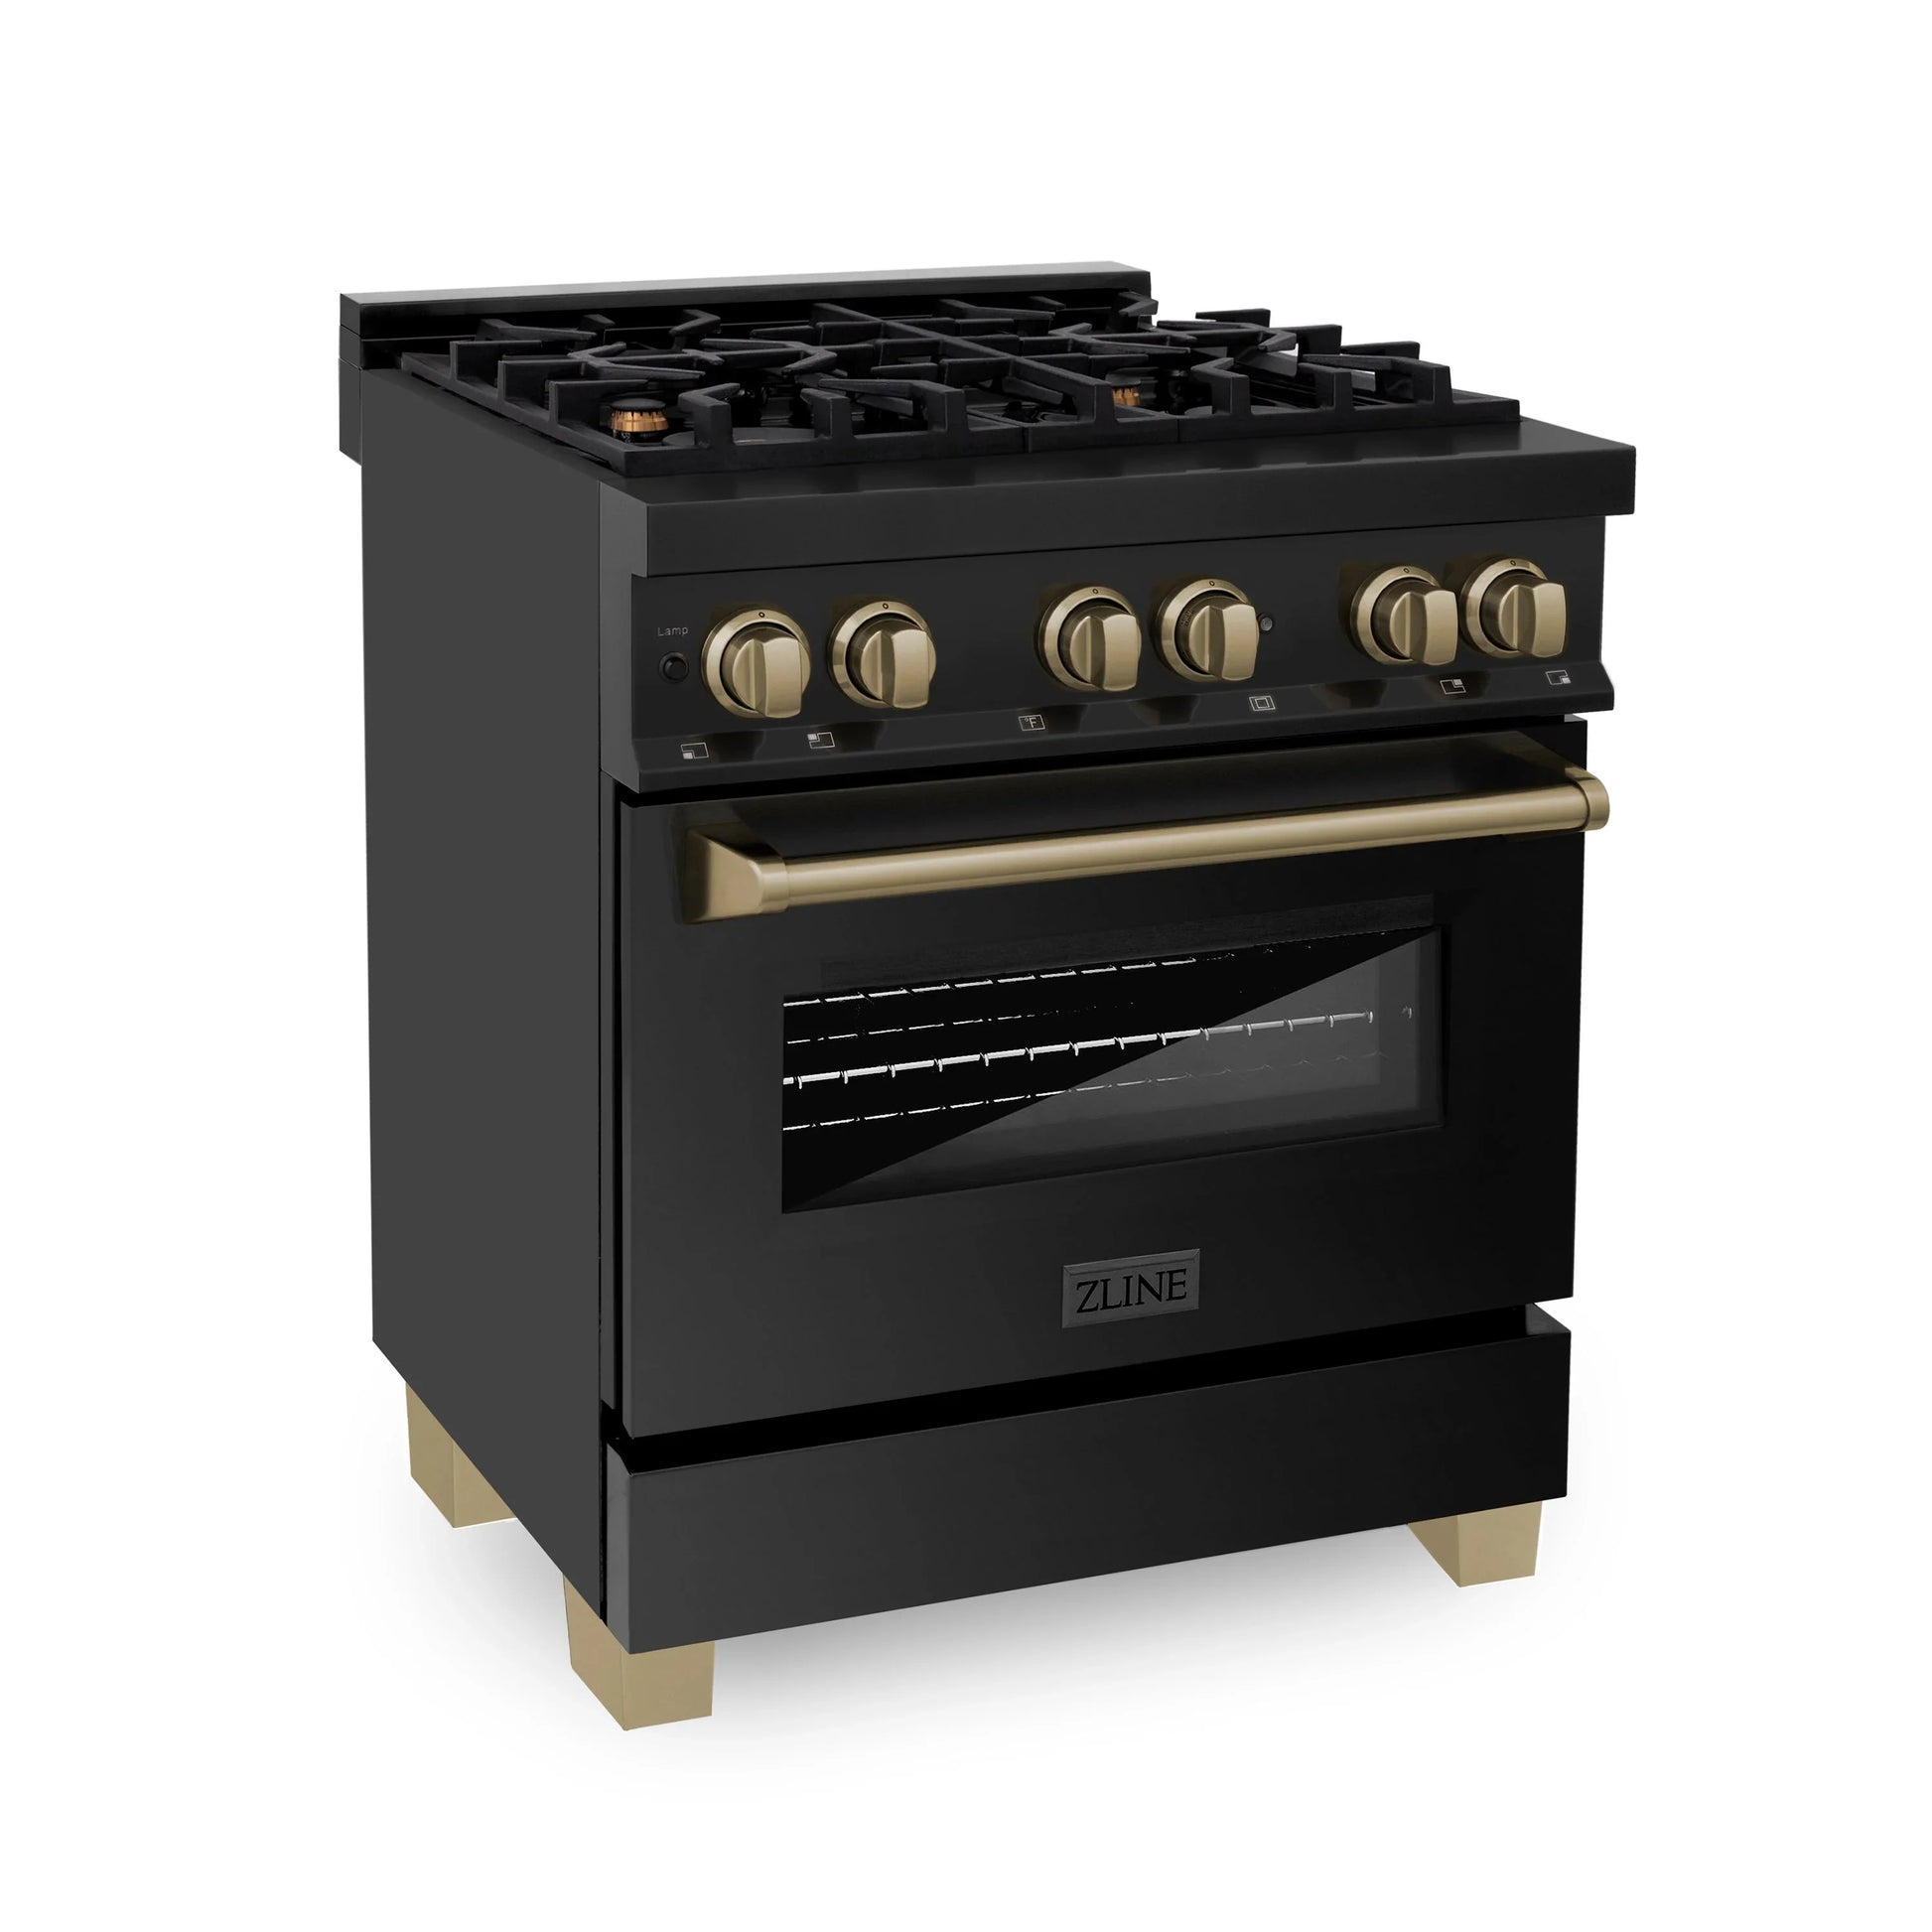 ZLINE Autograph Edition 30" Dual Fuel Range with Gas Stove and Electric Oven - Black Stainless Steel, Champagne Bronze Accents